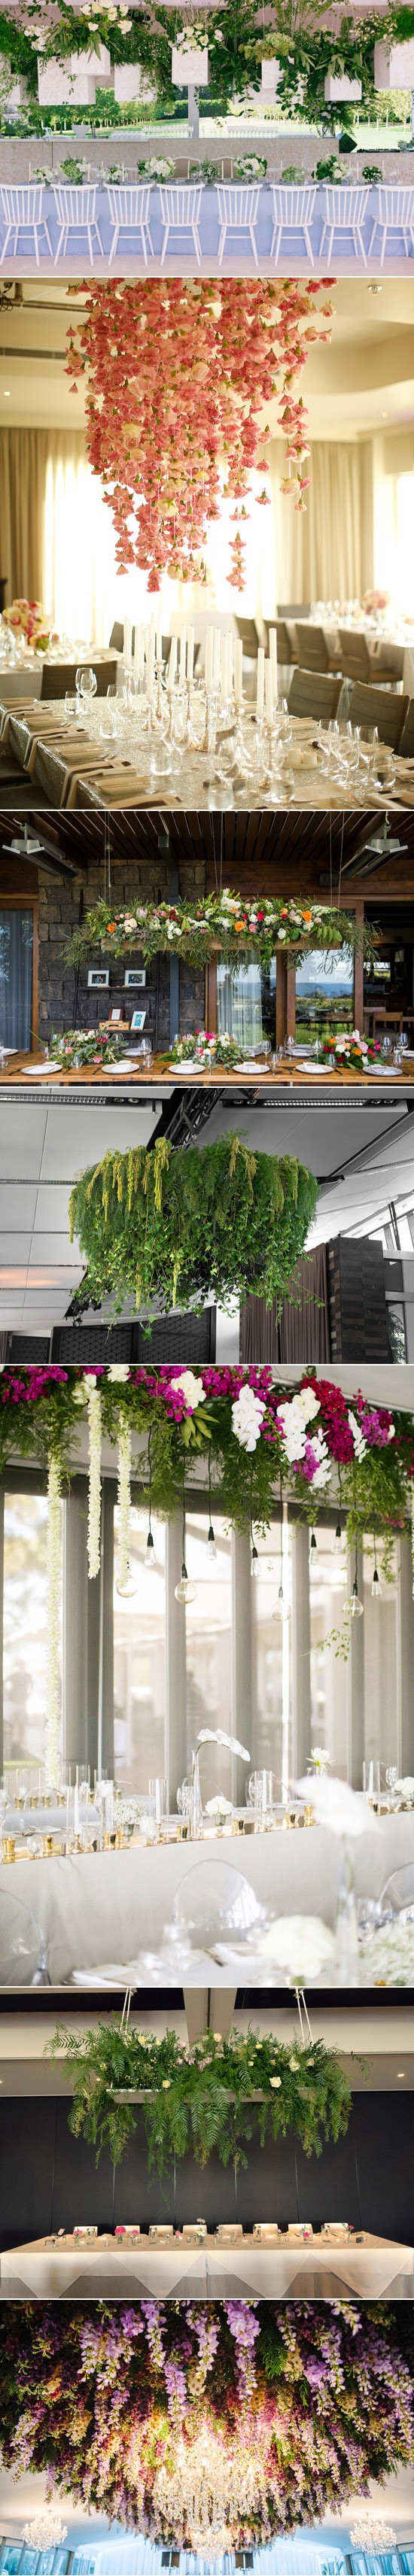 Suspended Floral installation Ideas 2